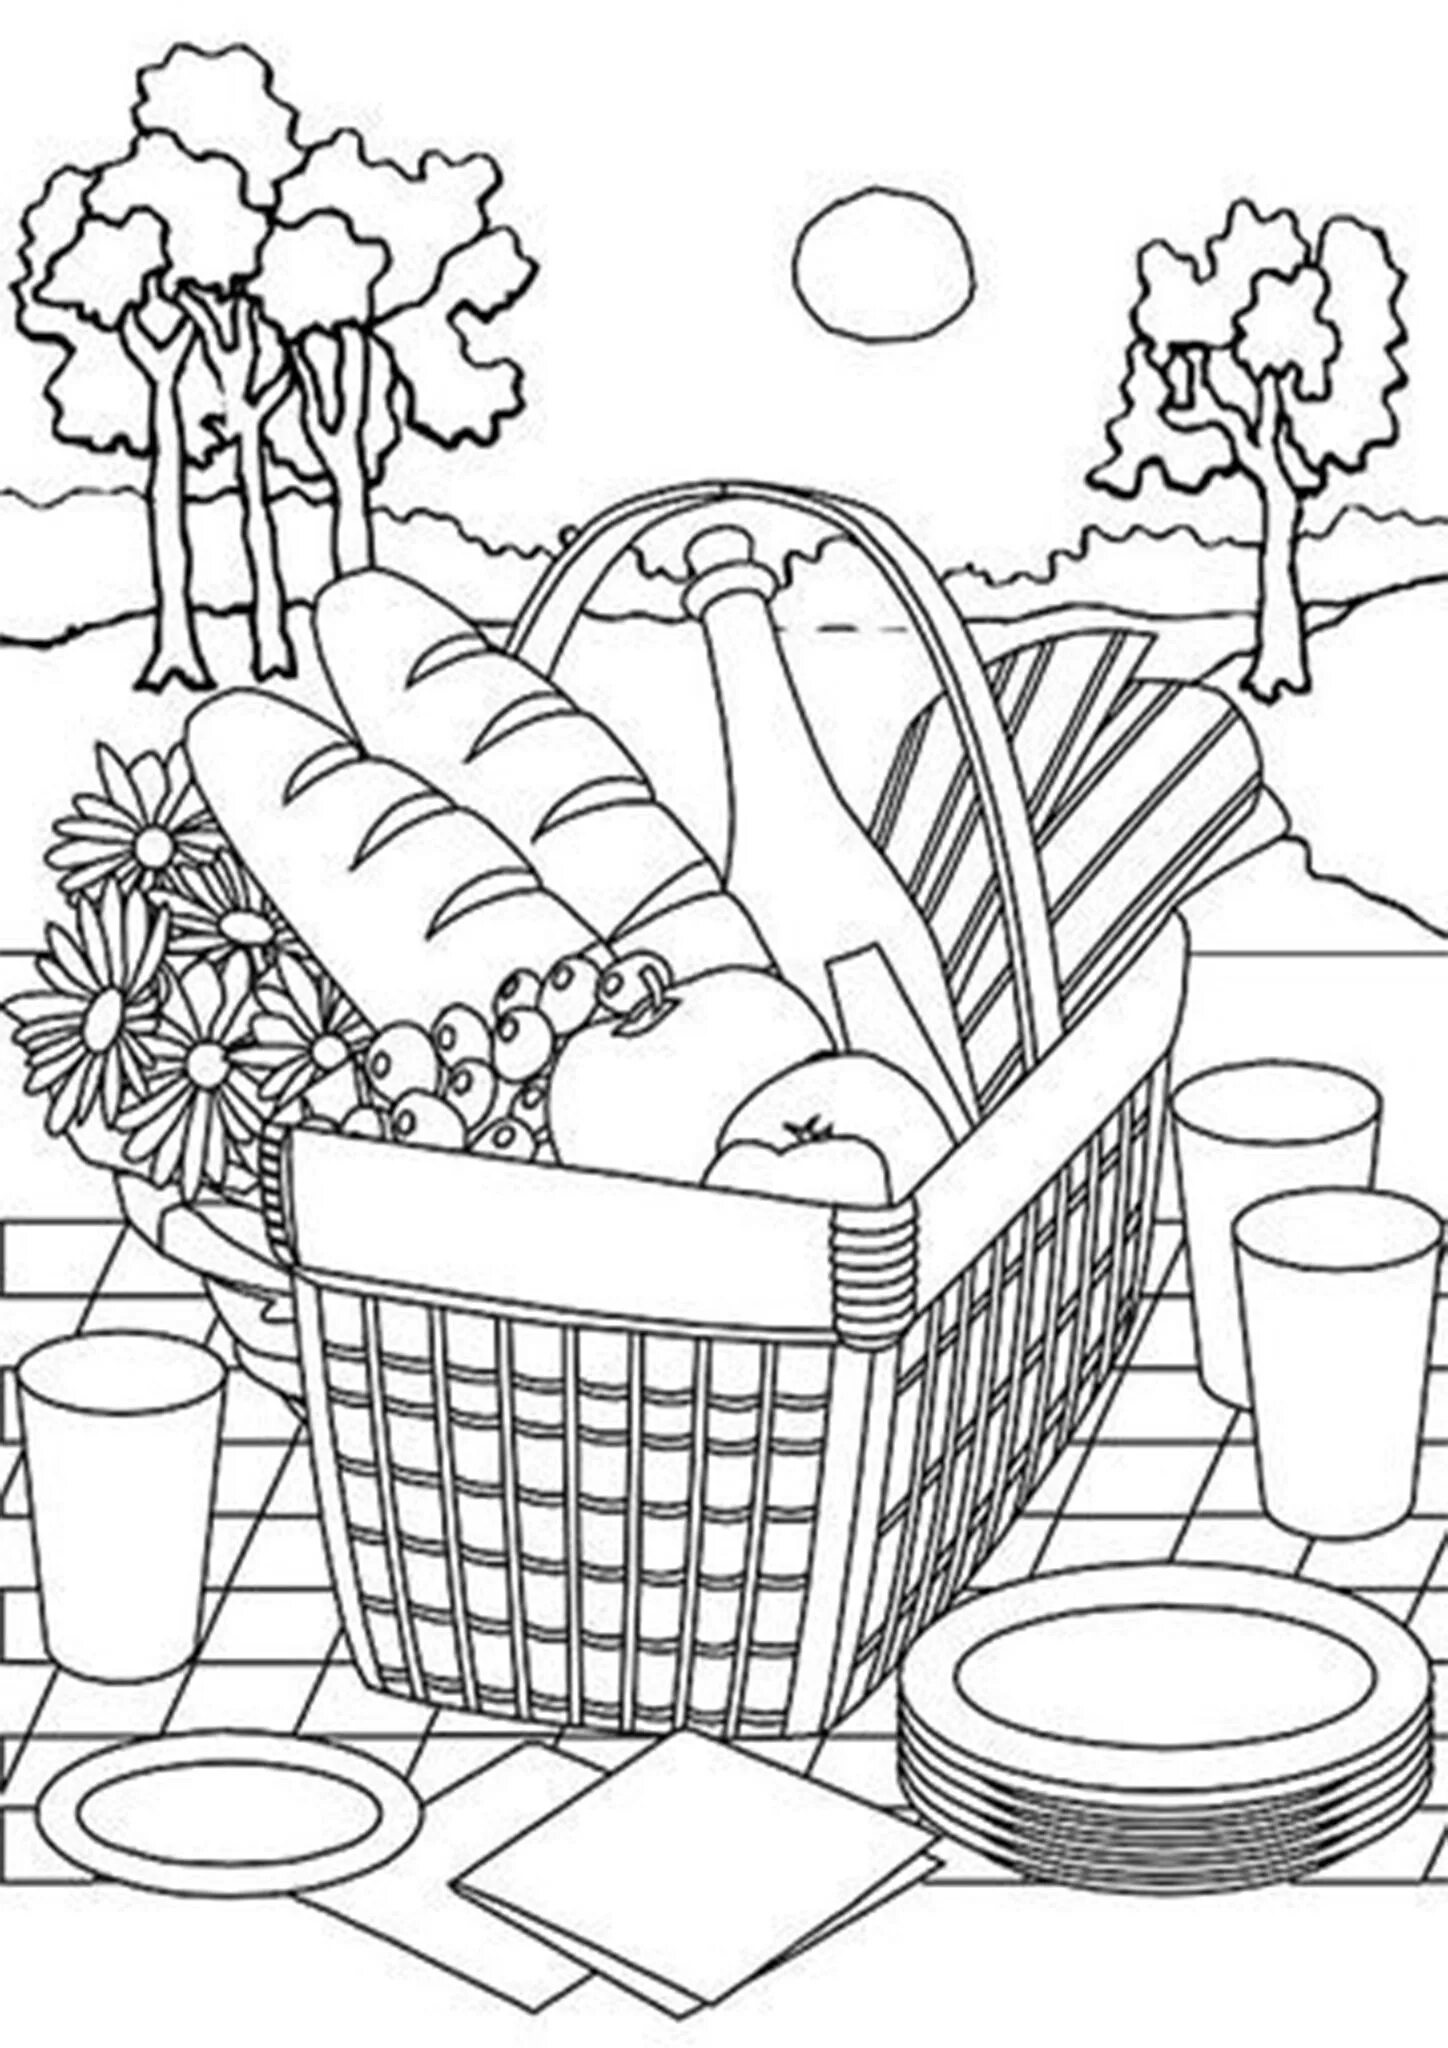 Picnic basket with food #18